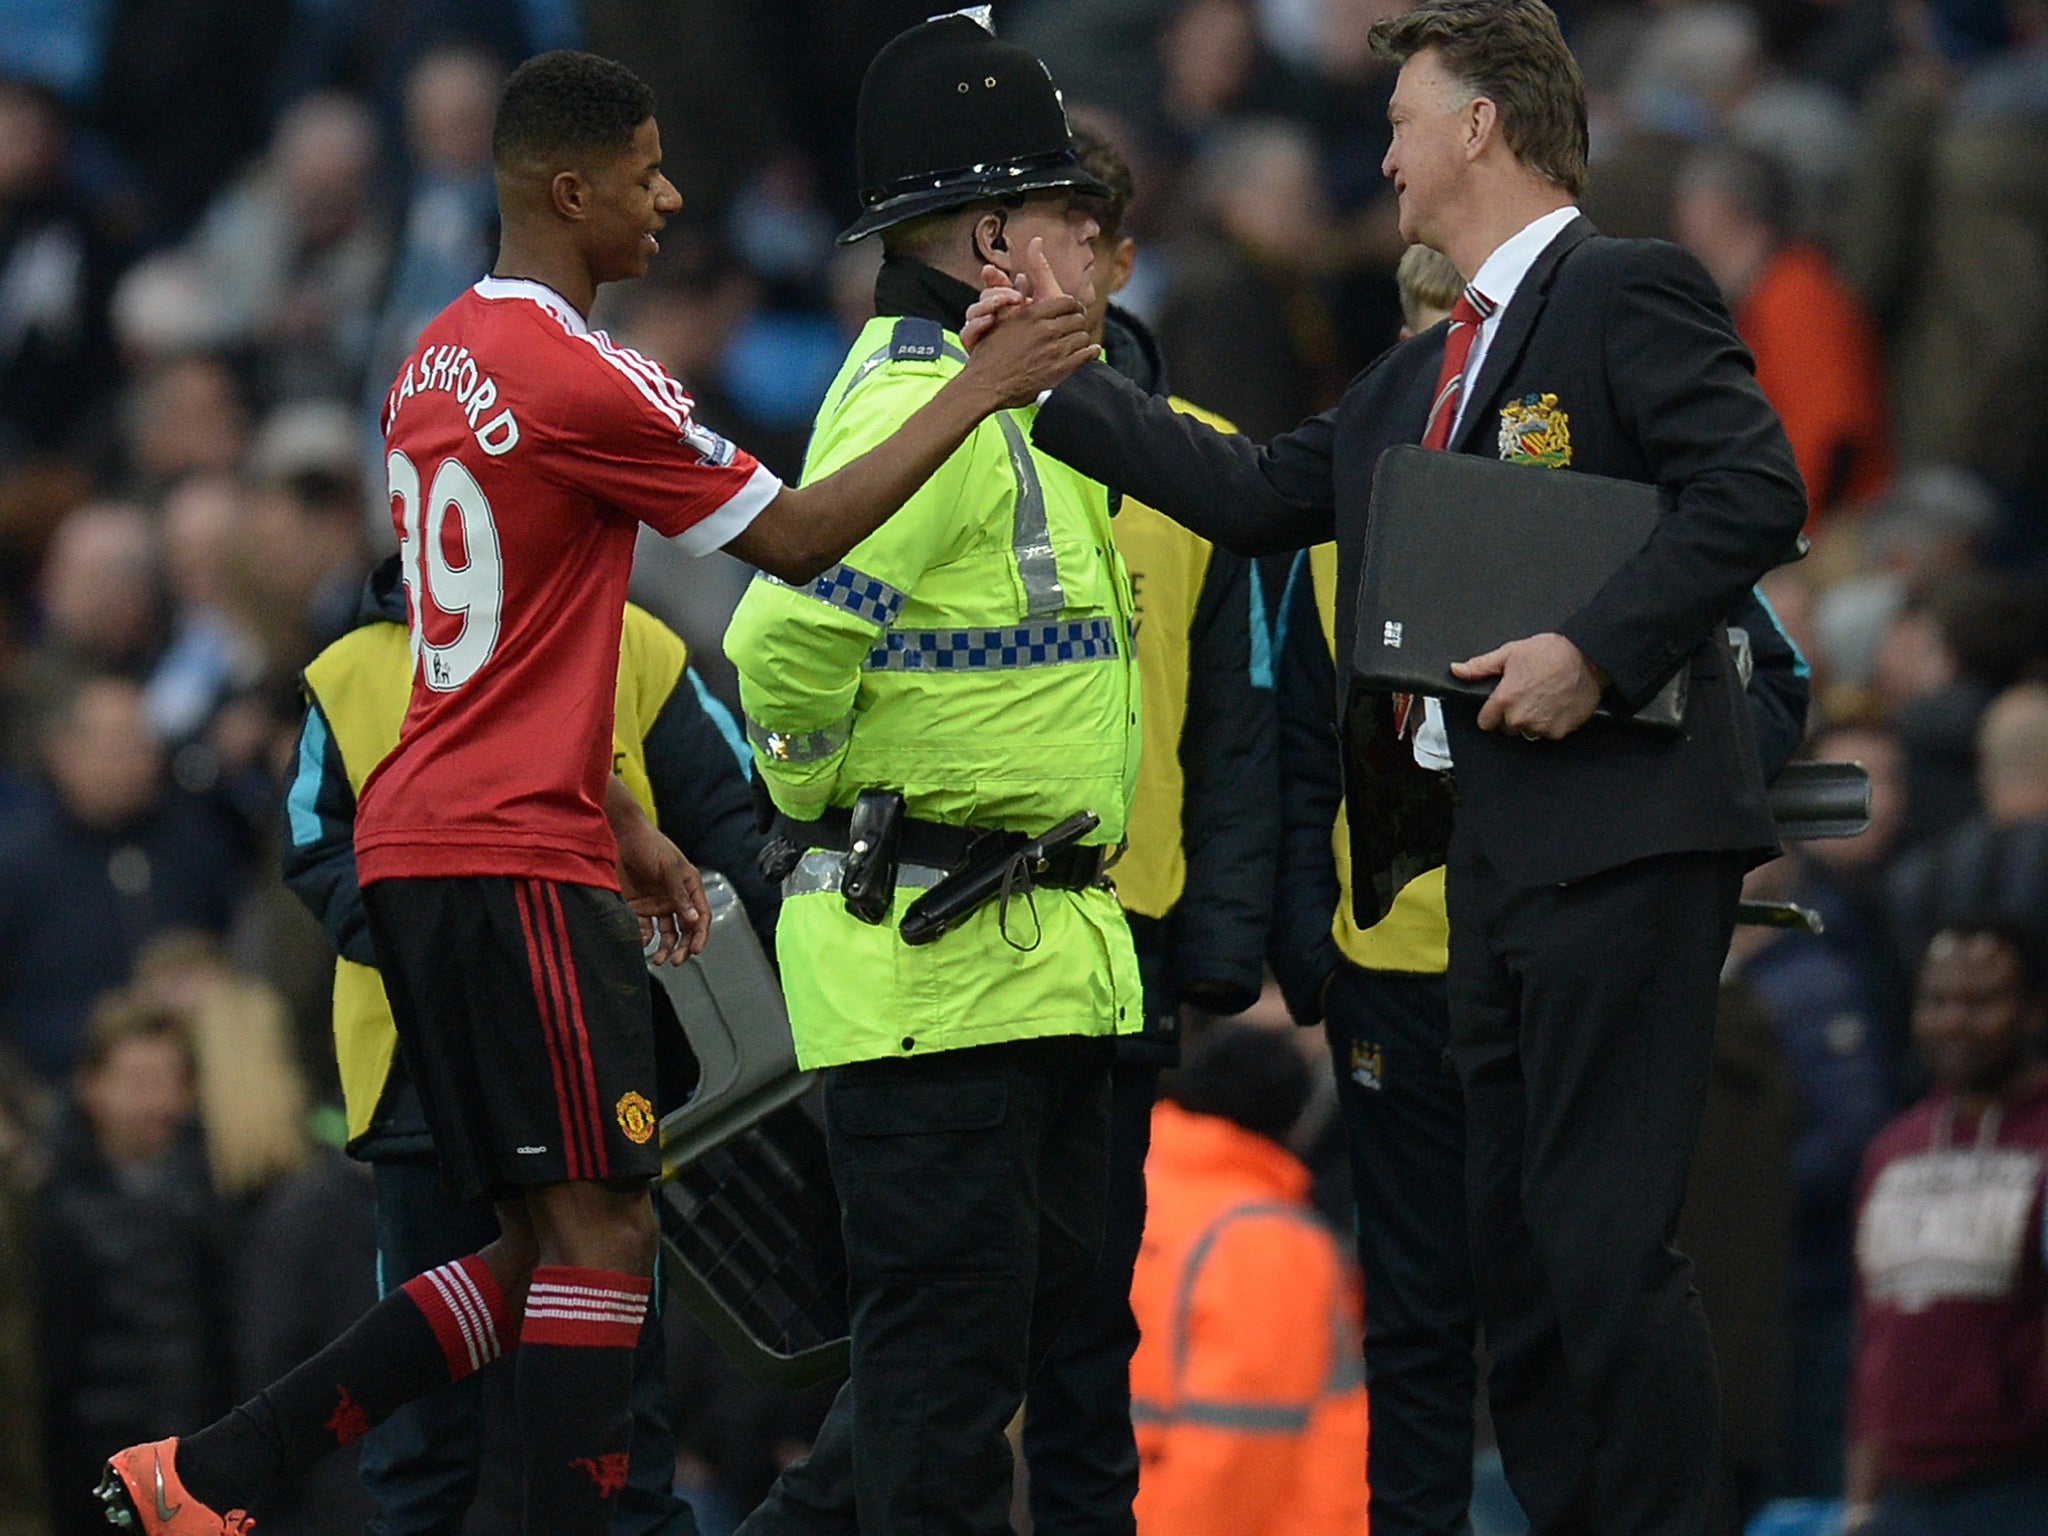 Marcus Rashford is congratulated by Louis van Gaal after the final whistle